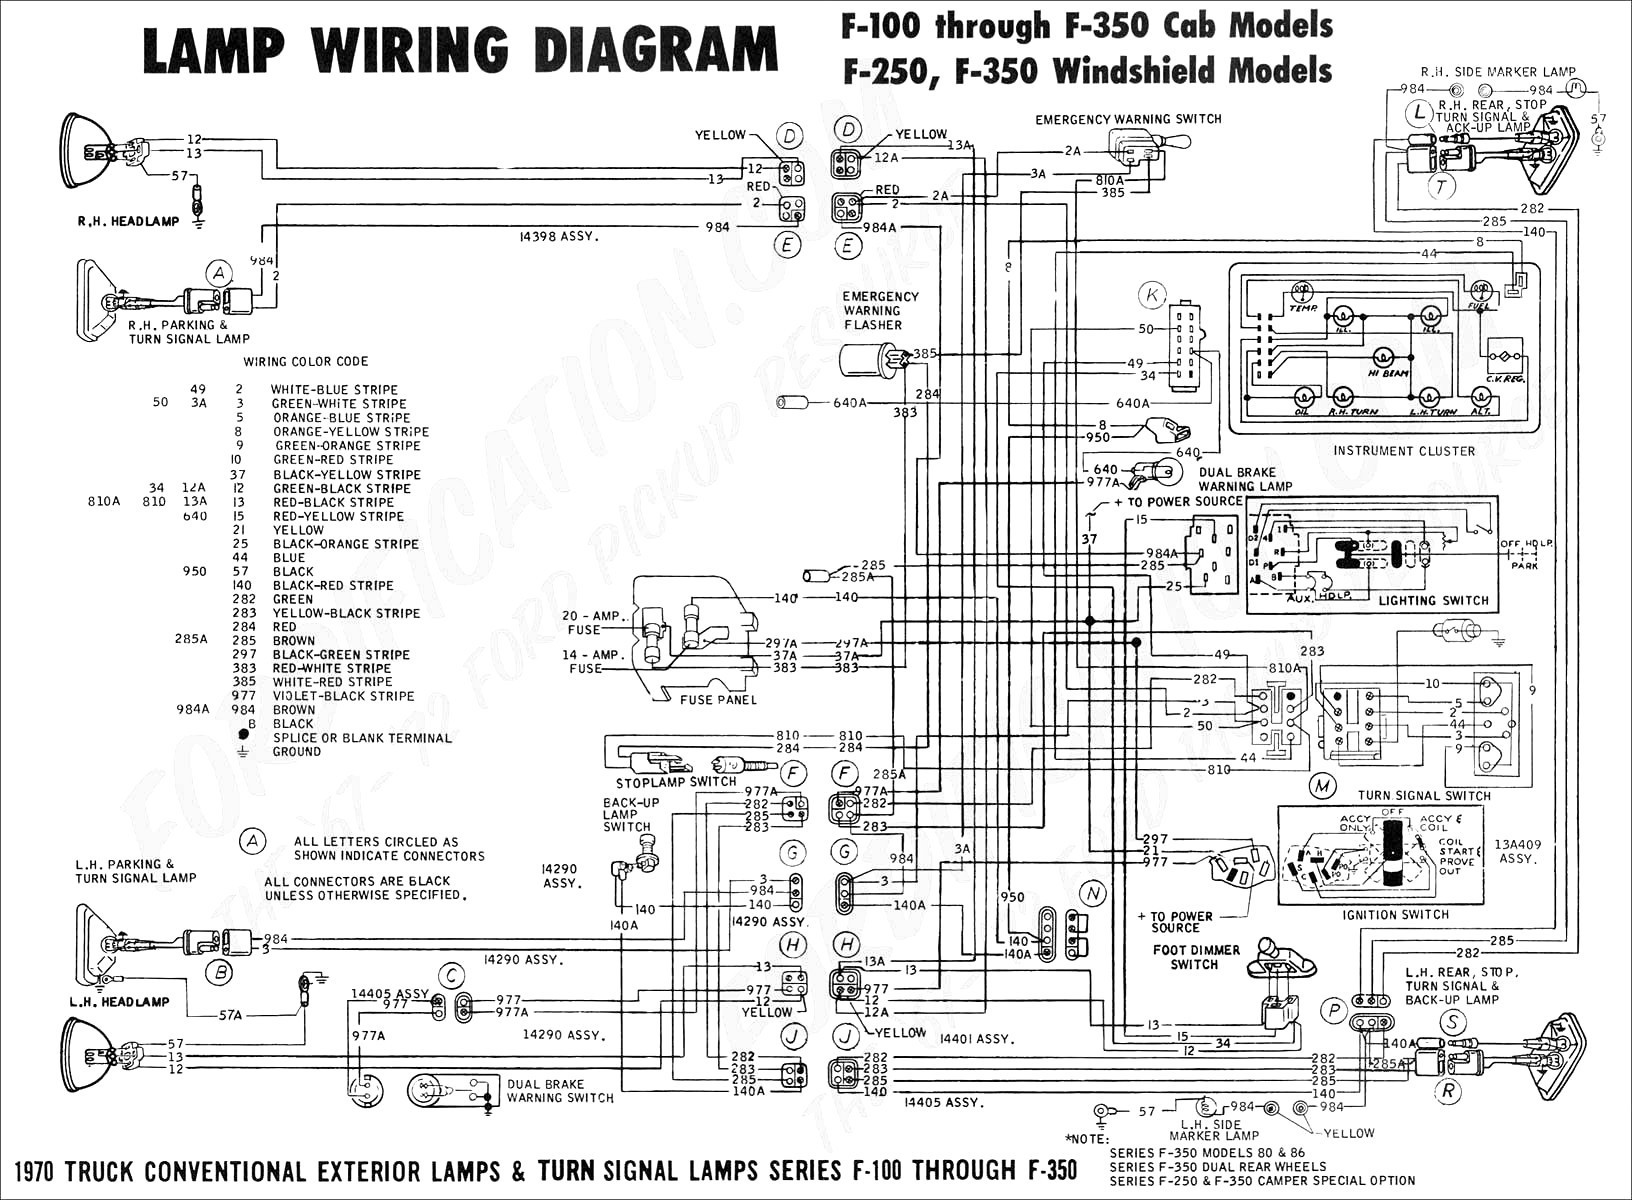 2004 Cadillac Cts Radio Wiring Diagram from mainetreasurechest.com